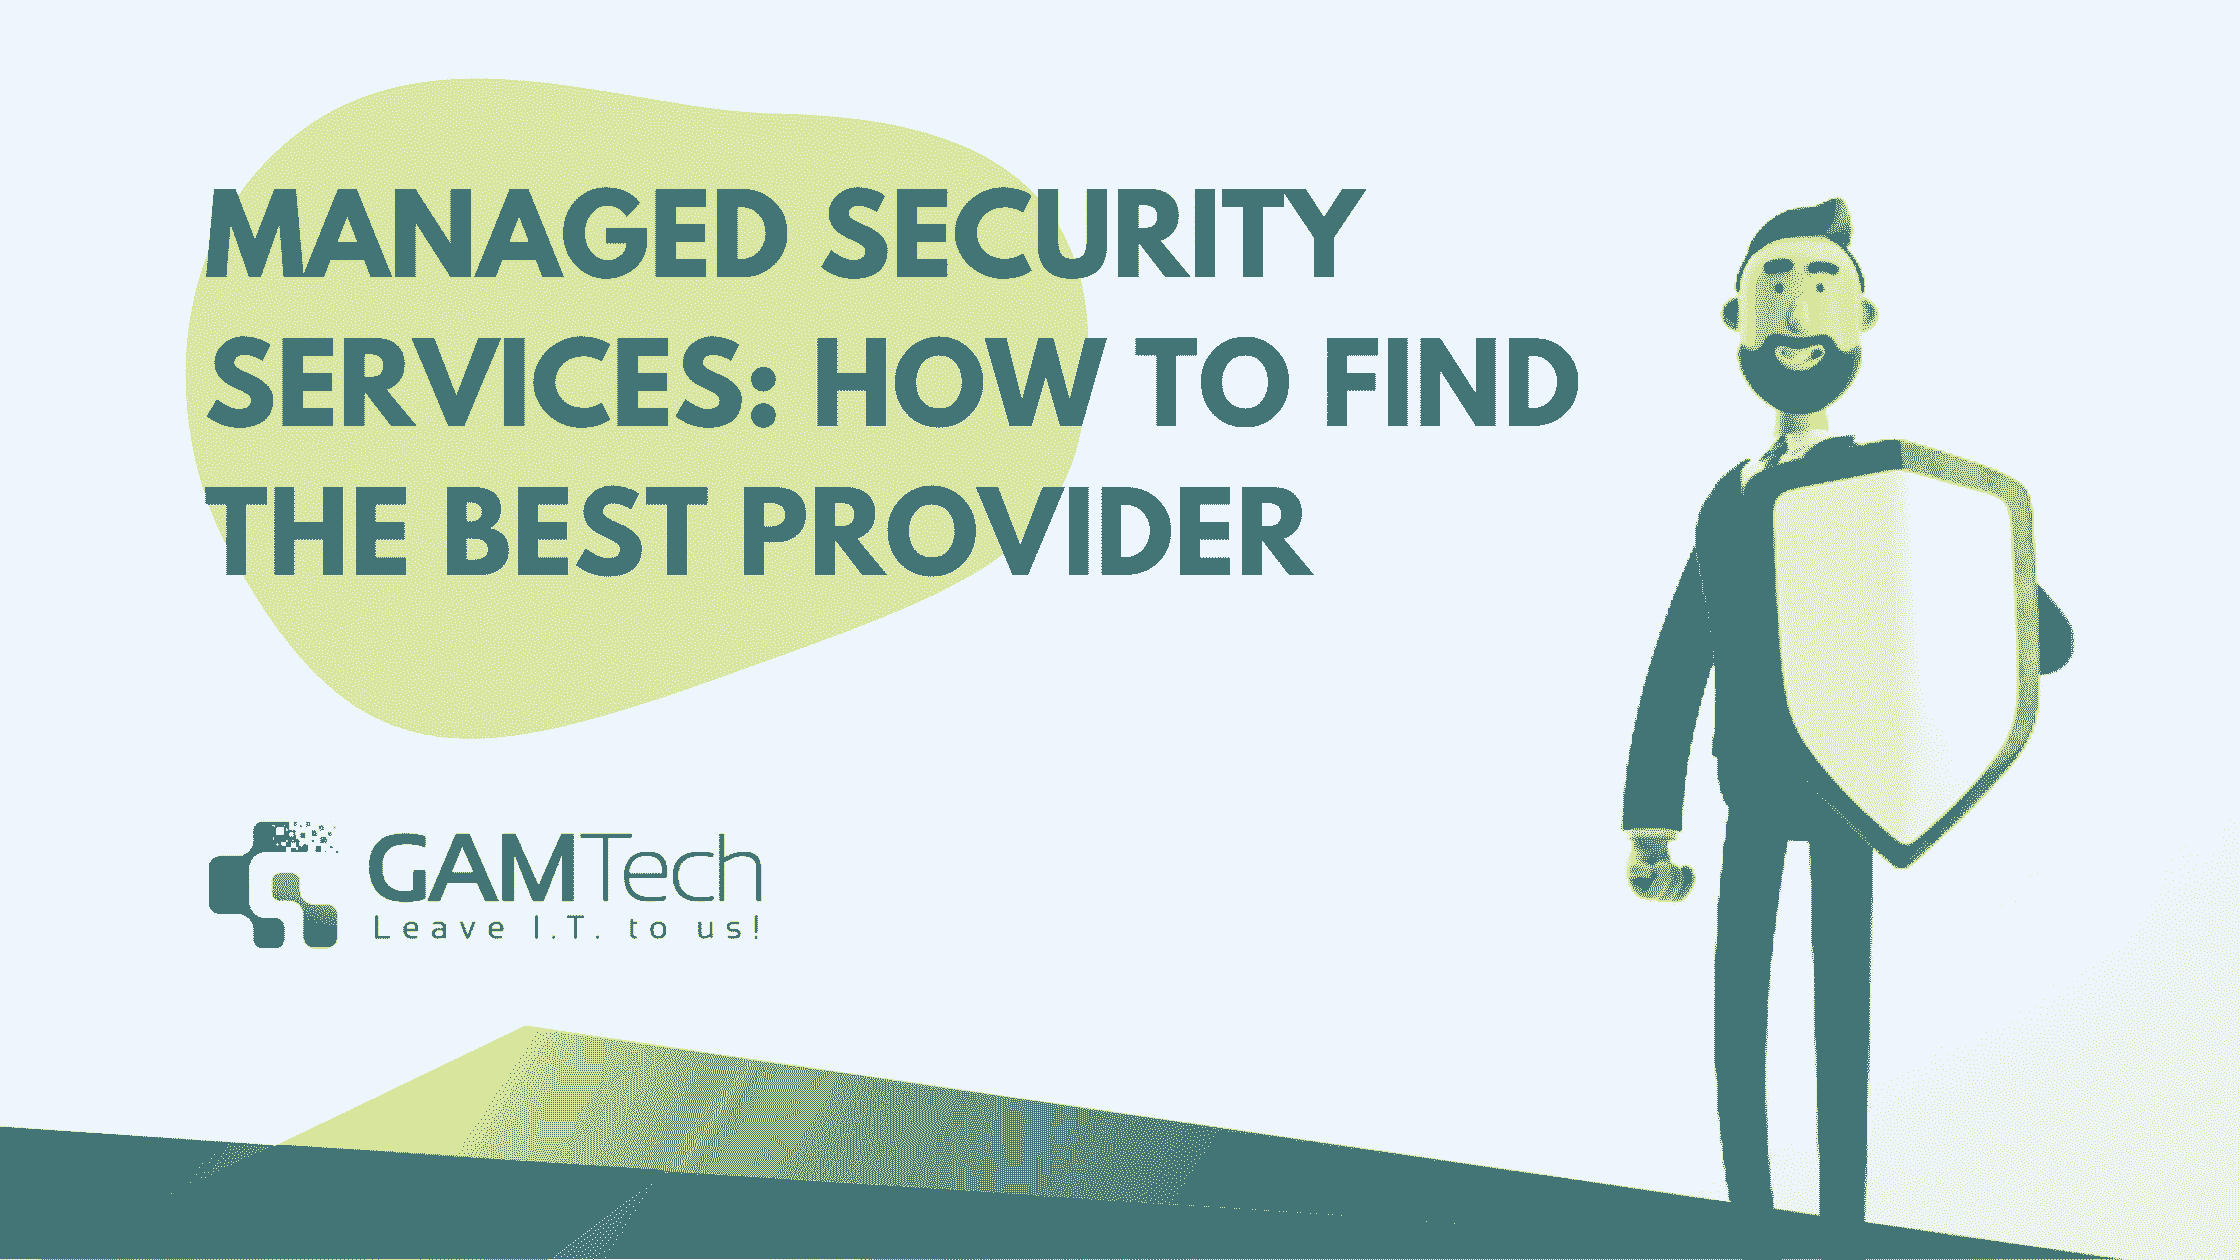 Managed Security Services: How To Find The Best Provider